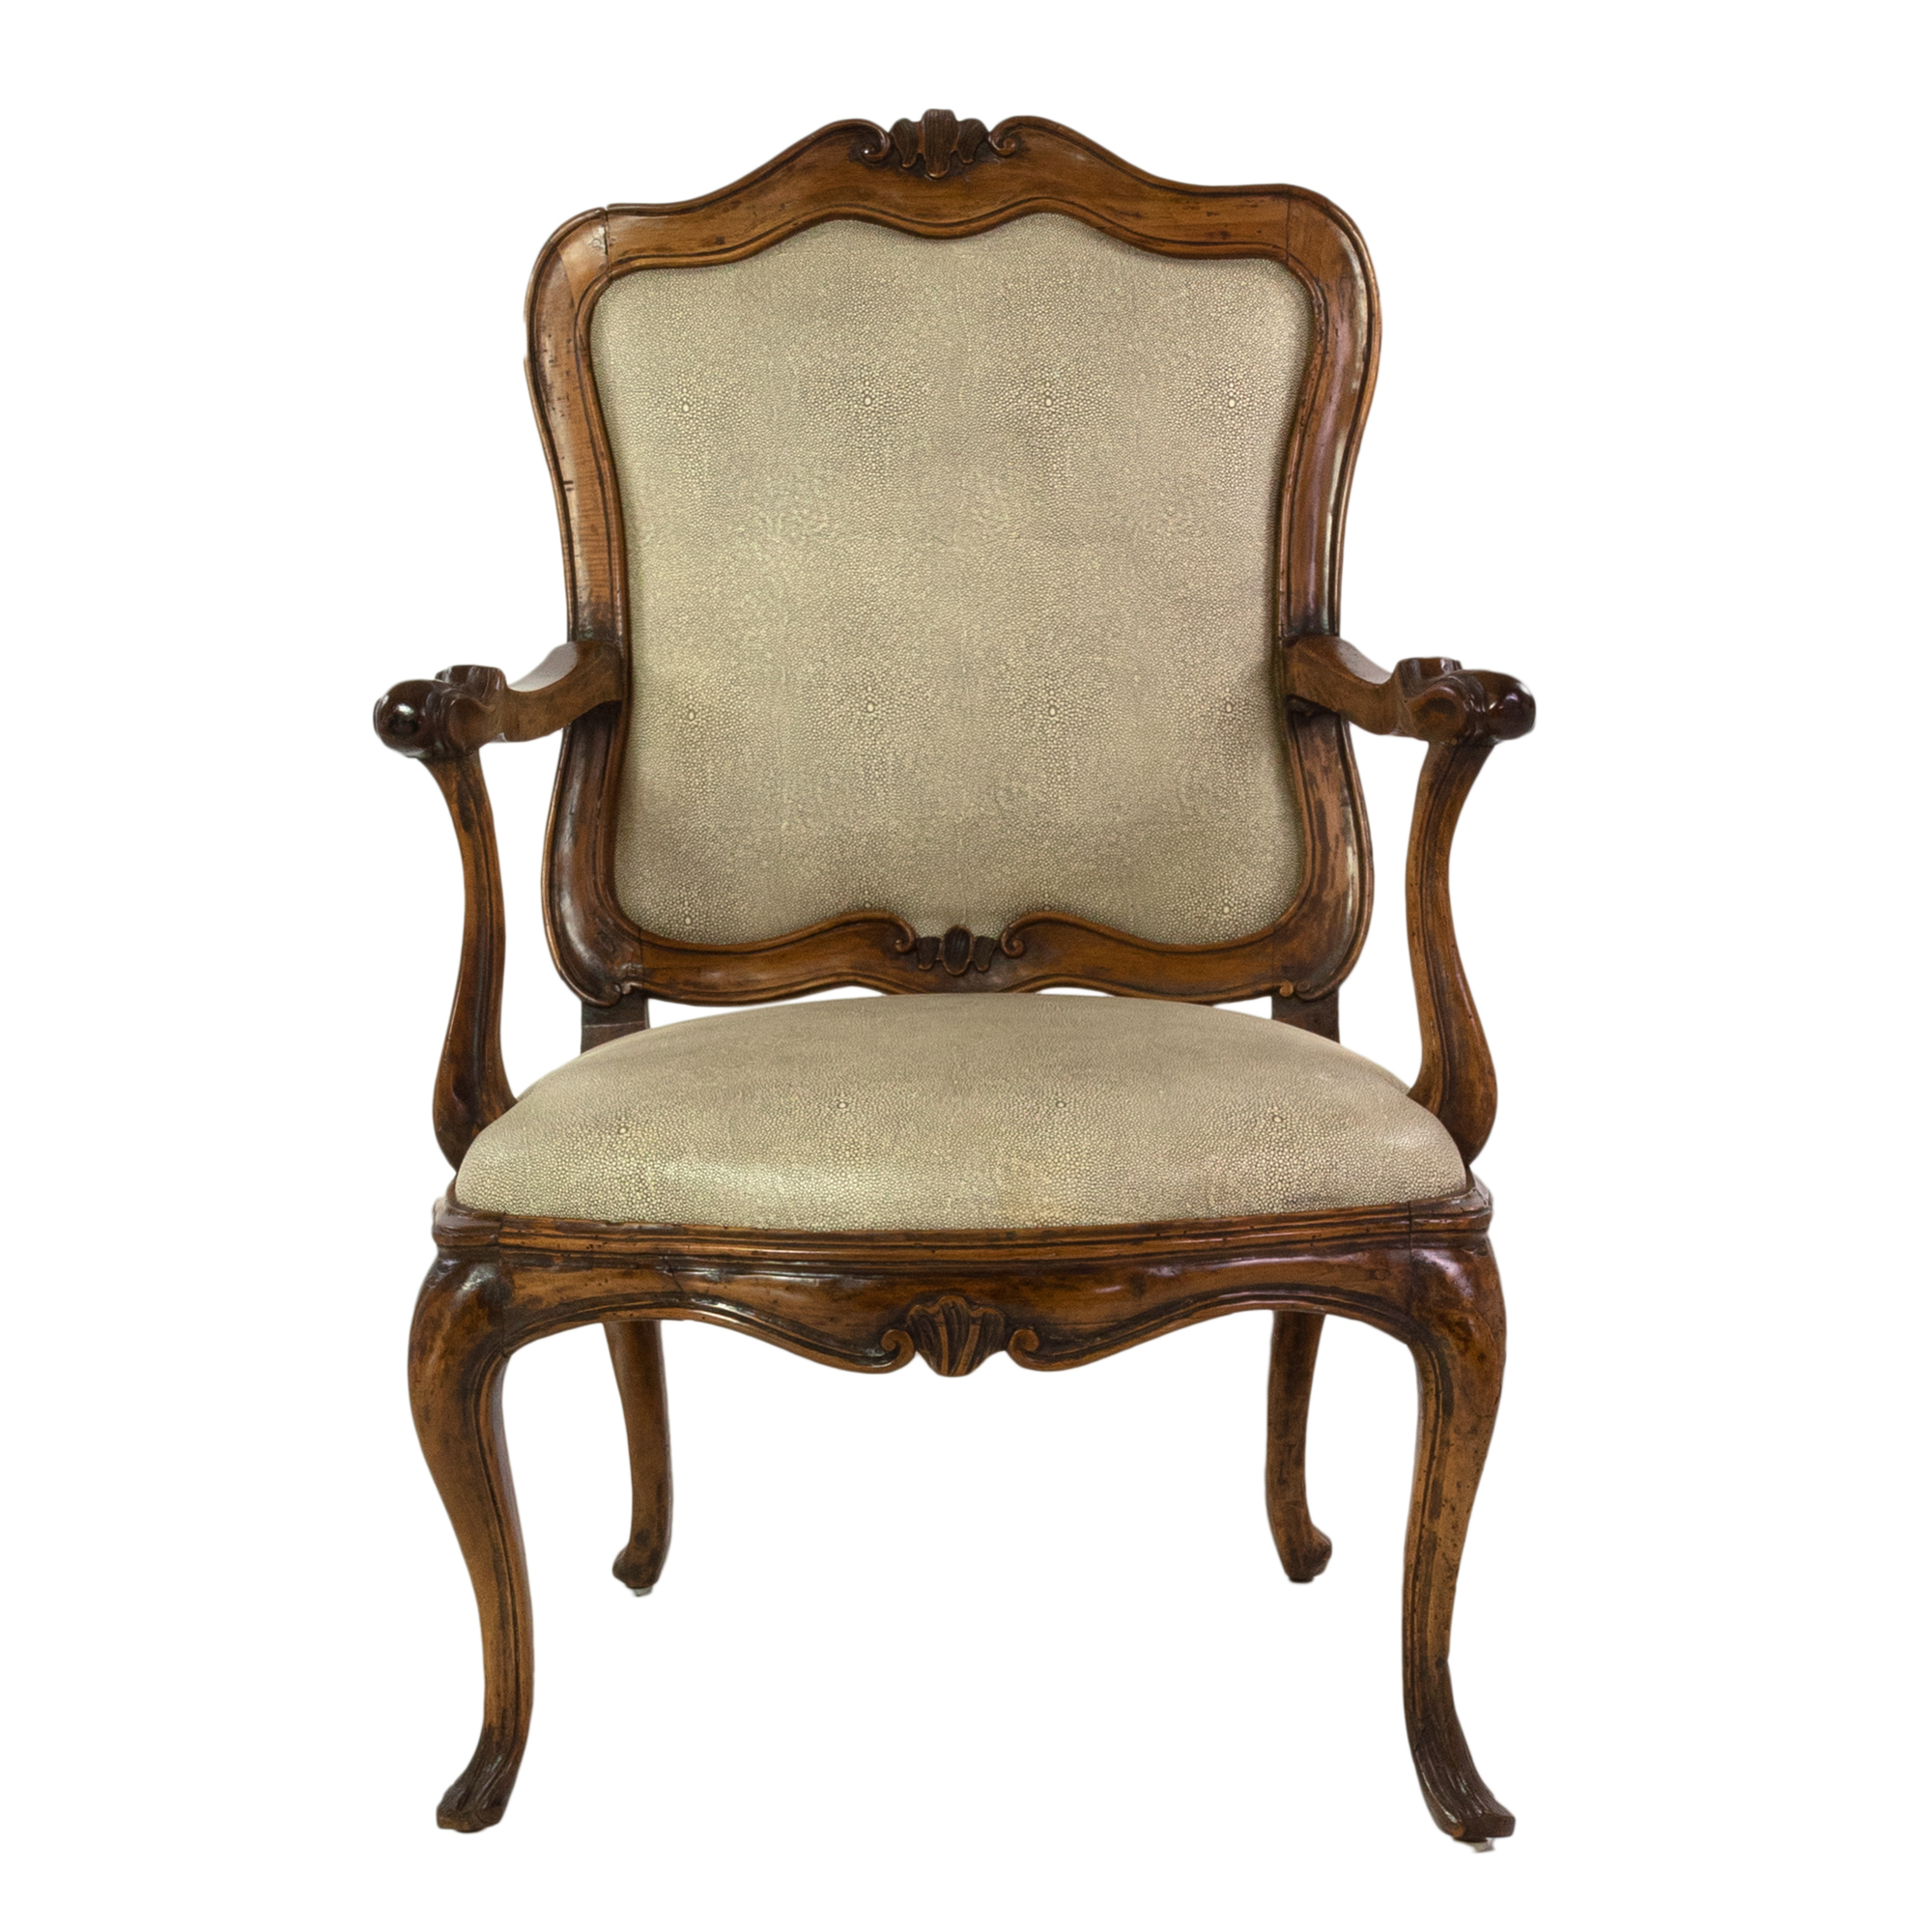 Antique Seating, Louis XV-Style Antiques, Louis XV-Style Chairs